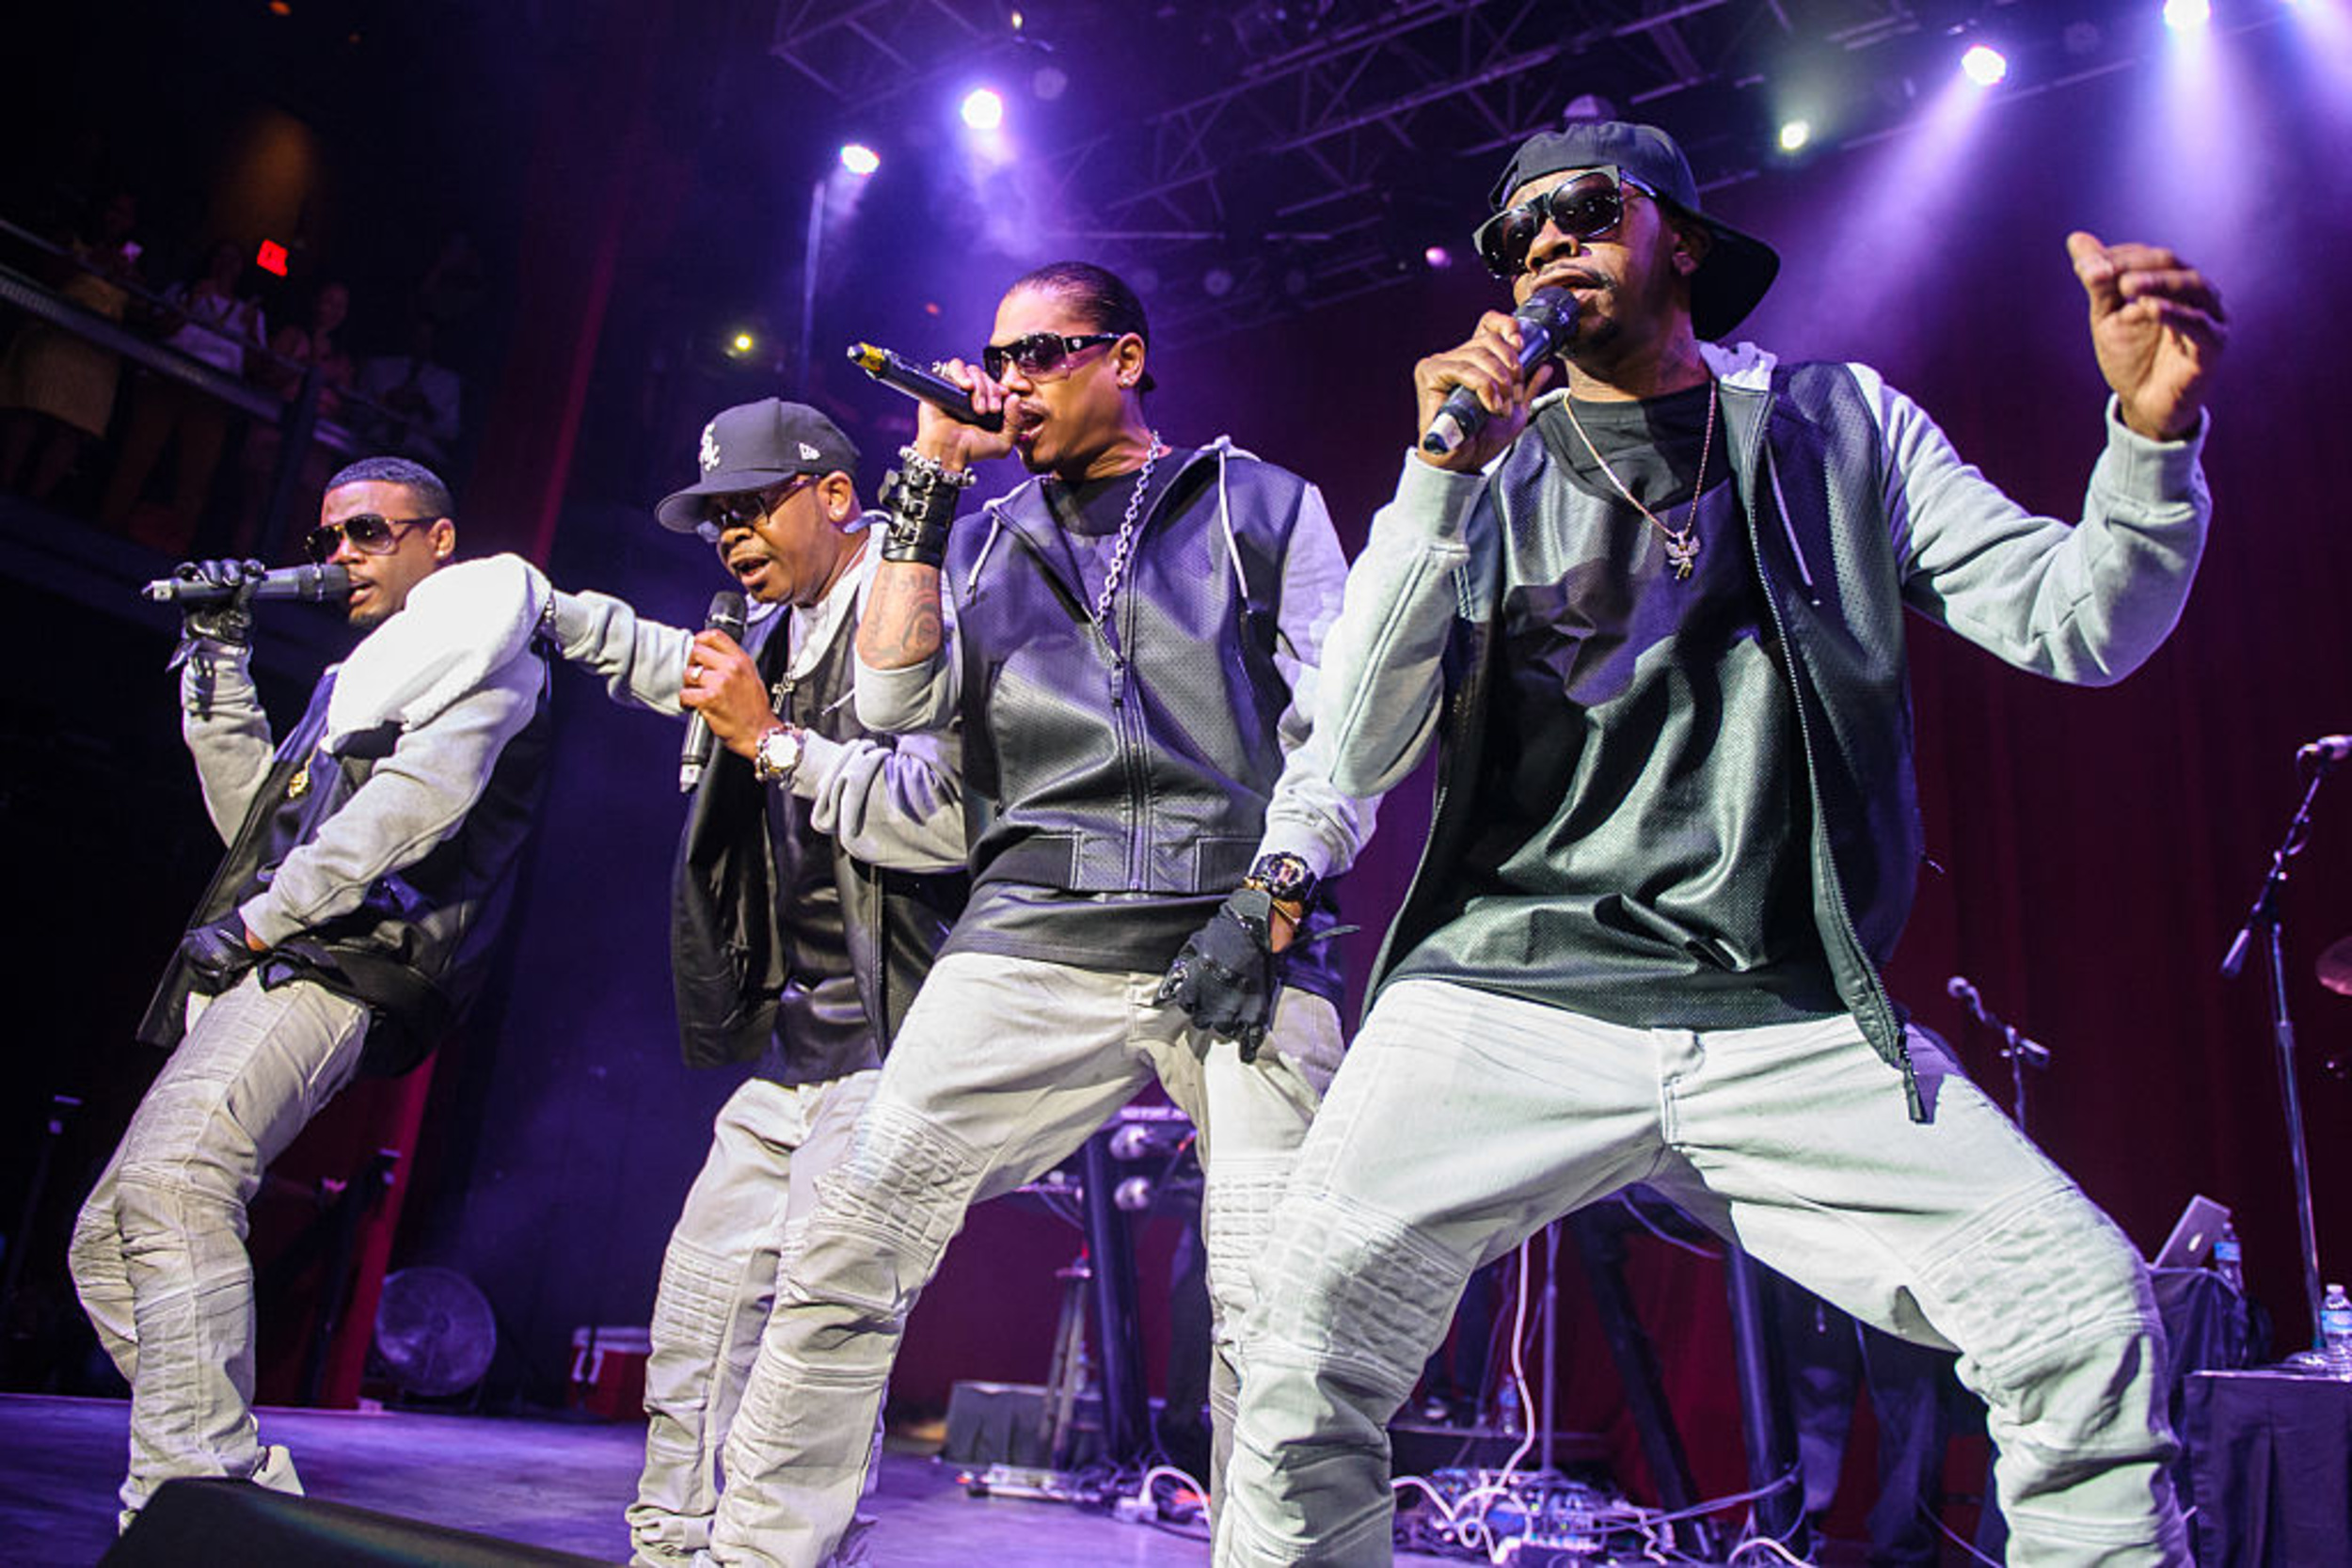 <p>In 1991, Jodeci released its debut album <em>Forever My Lady.</em> The eponymous single was written and produced by group member Devante Swing, along with Al B. Sure! On the track, the group sings about finding out their partner is having a baby and it helps solidify that he sees spending forever with her. </p><p><a href='https://www.msn.com/en-us/community/channel/vid-cj9pqbr0vn9in2b6ddcd8sfgpfq6x6utp44fssrv6mc2gtybw0us'>Follow us on MSN to see more of our exclusive entertainment content.</a></p>